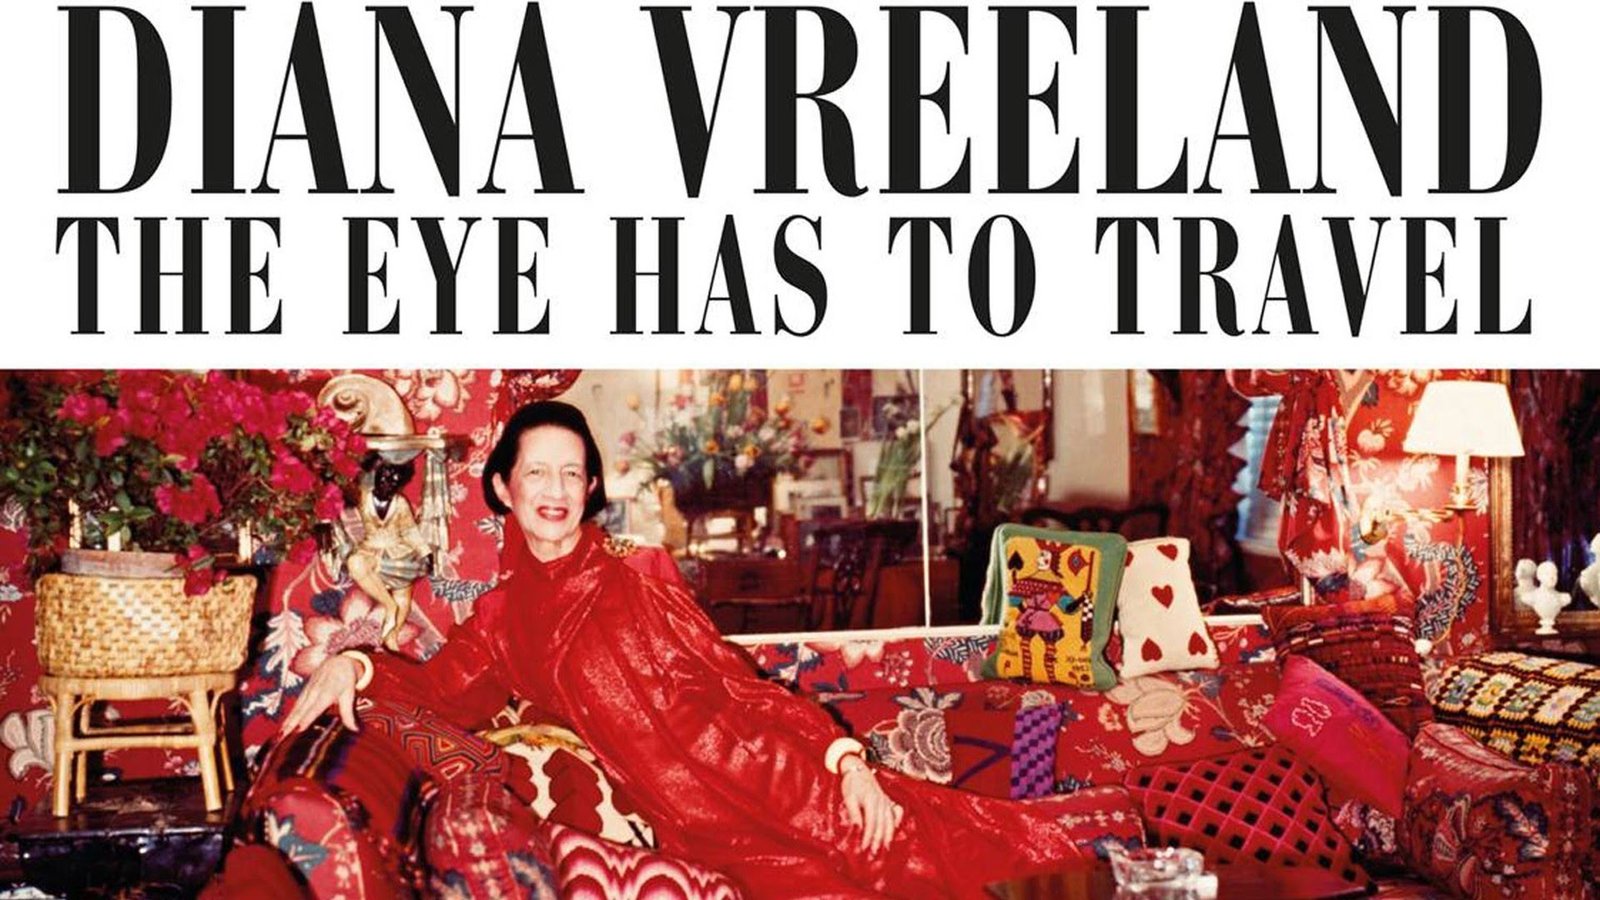 Diana Vreeland: The Eye Has to Travel - An Intimate Portrait of a Female Fashion Icon